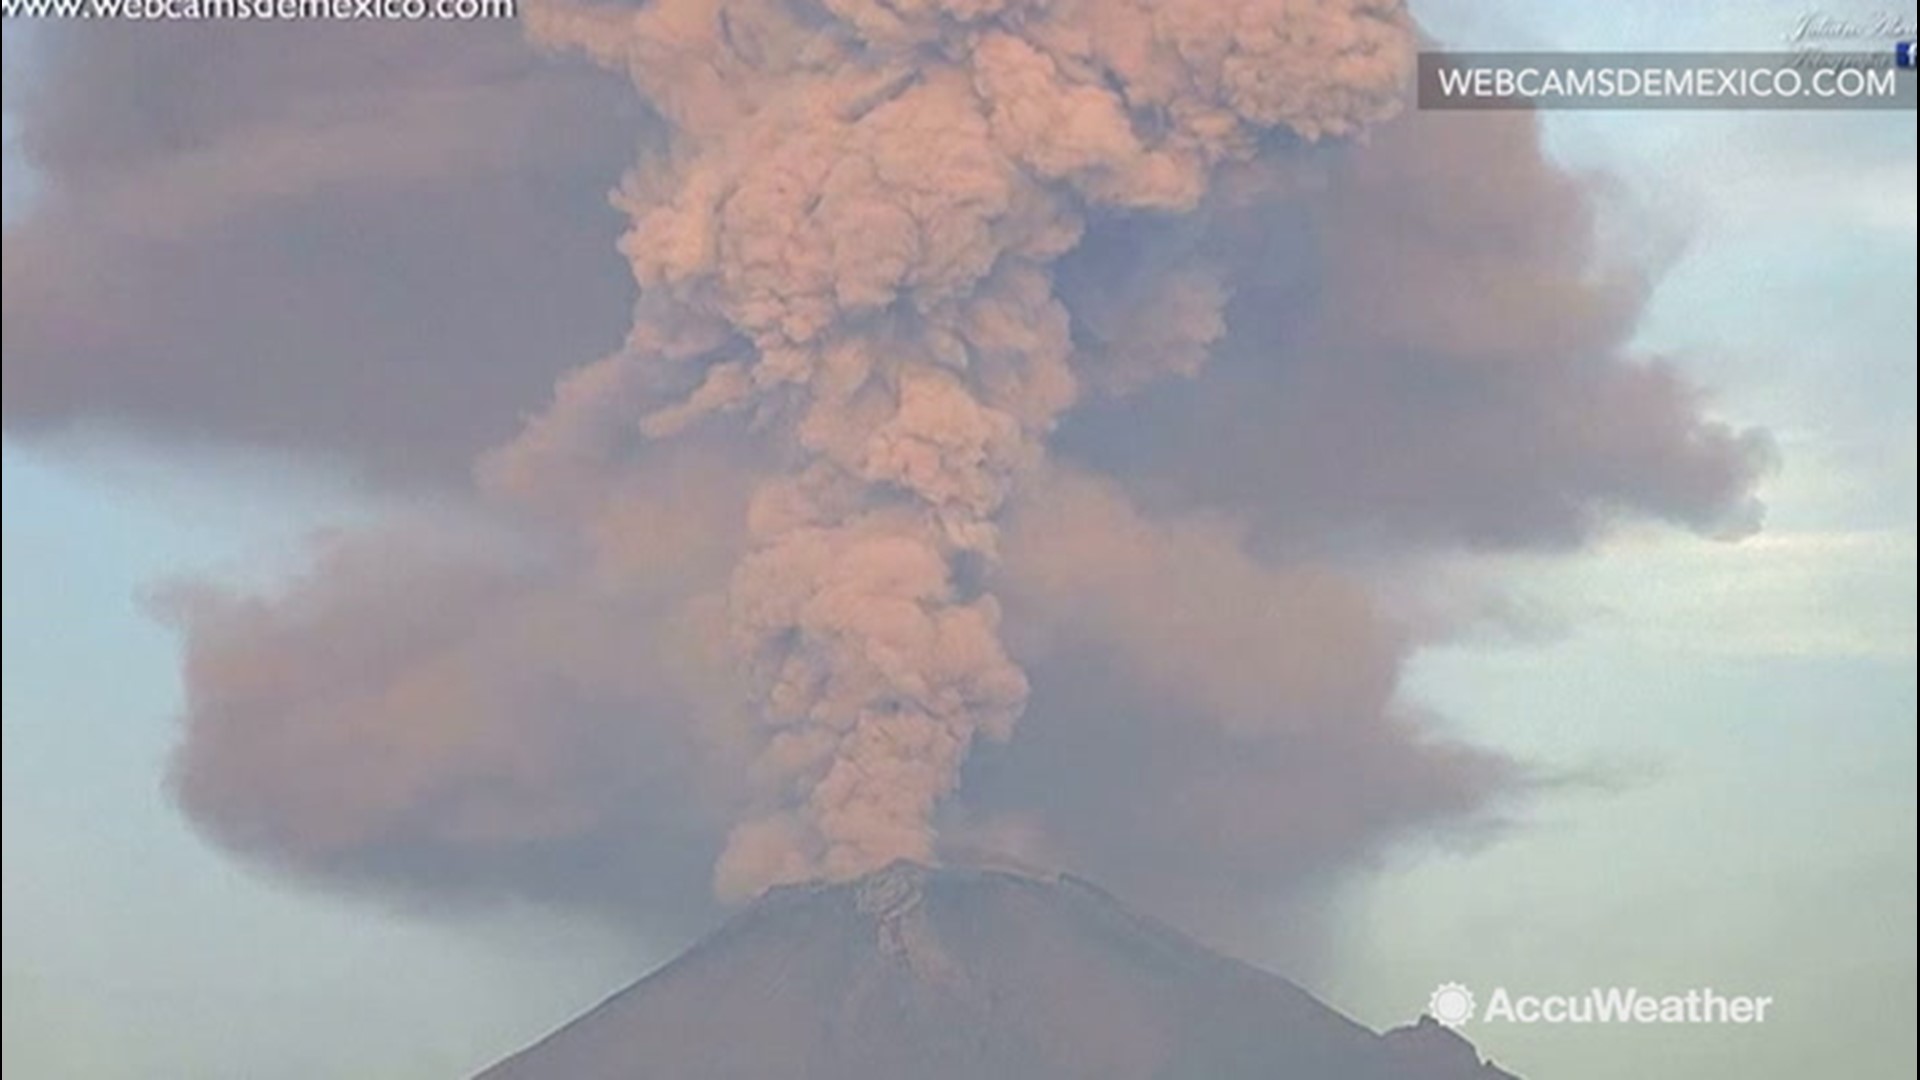 As Mexico's Popocatepetl volcano violently erupted on June 17, it sent ash and debris racing into the sky. According to local media, the ash plume stretched as high as 2.5 miles.